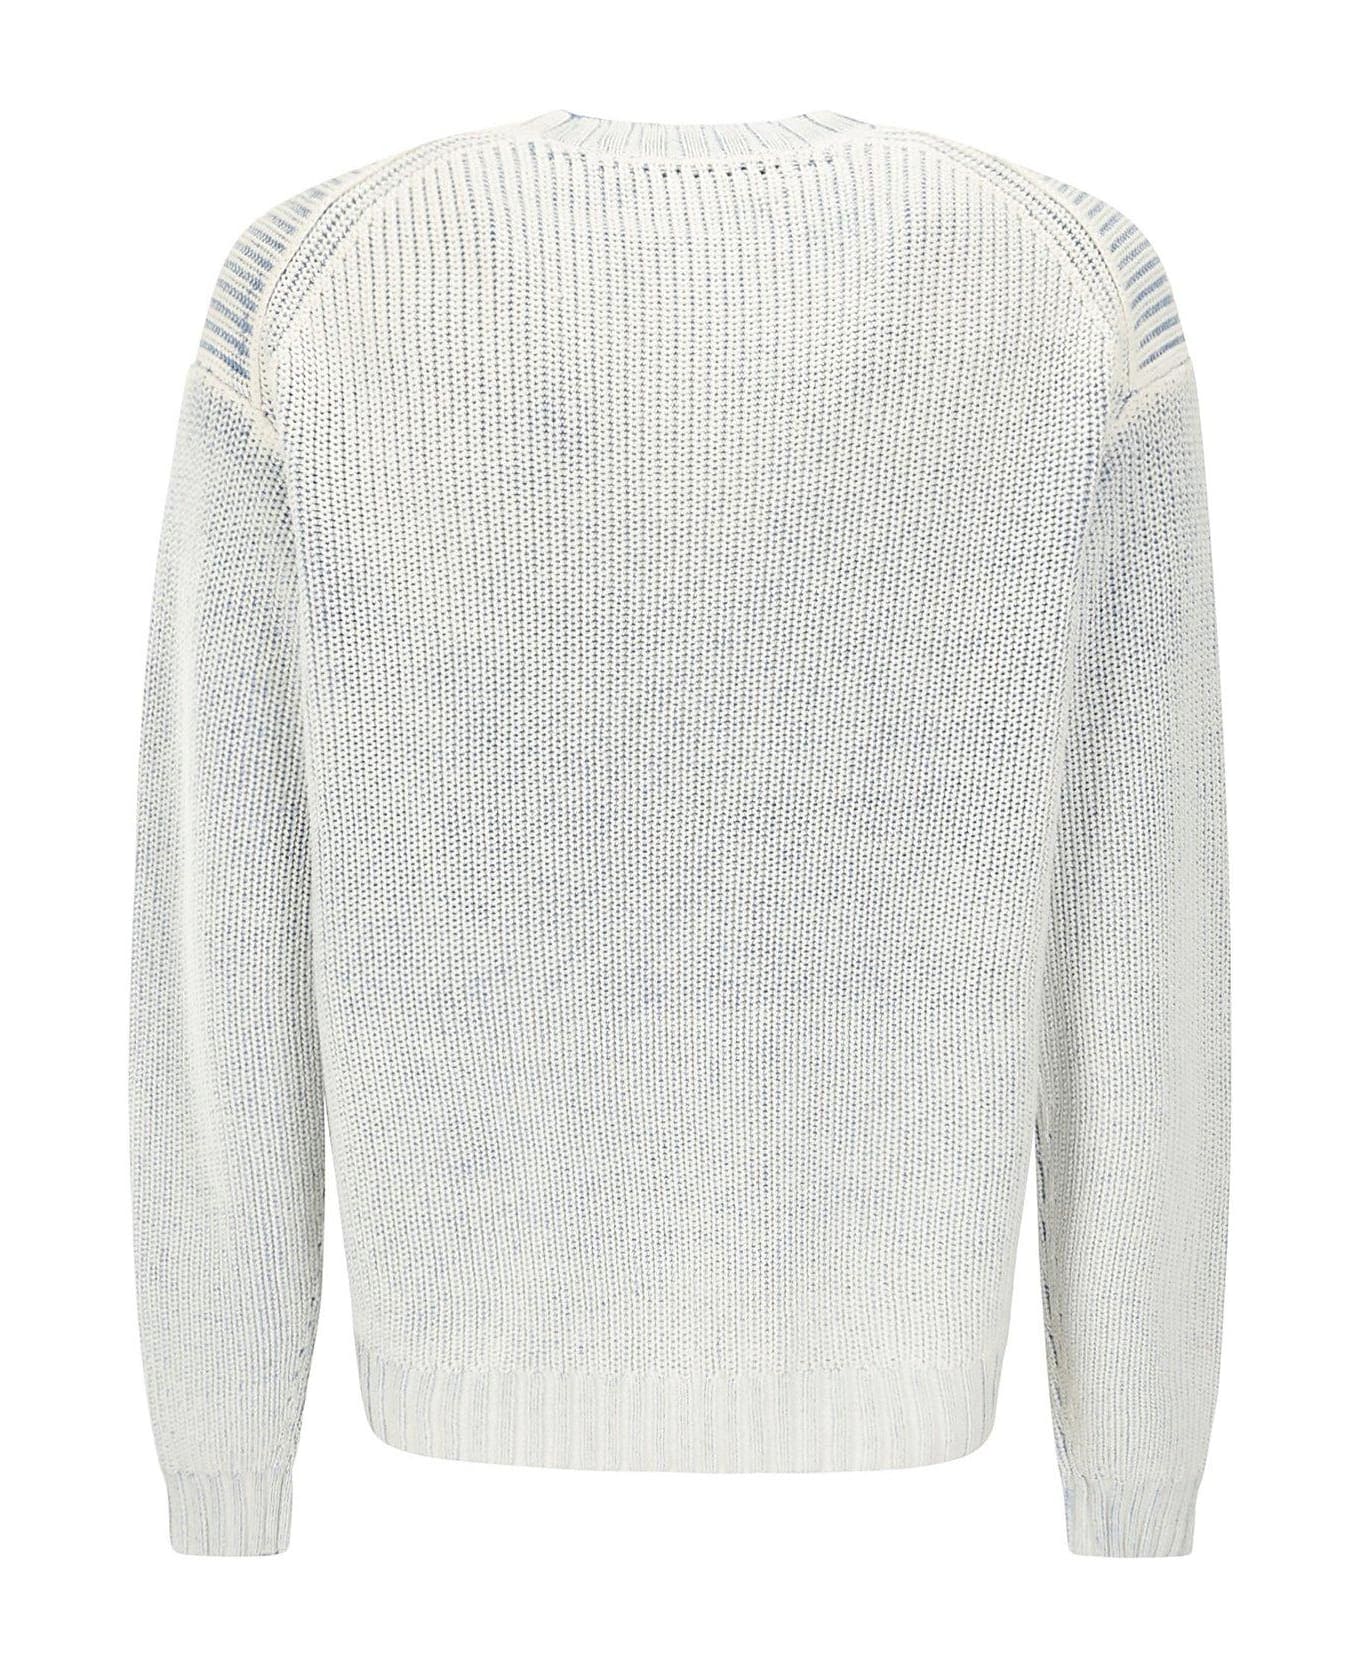 Acne Studios Logo Patch Knitted Jumper - NAVY